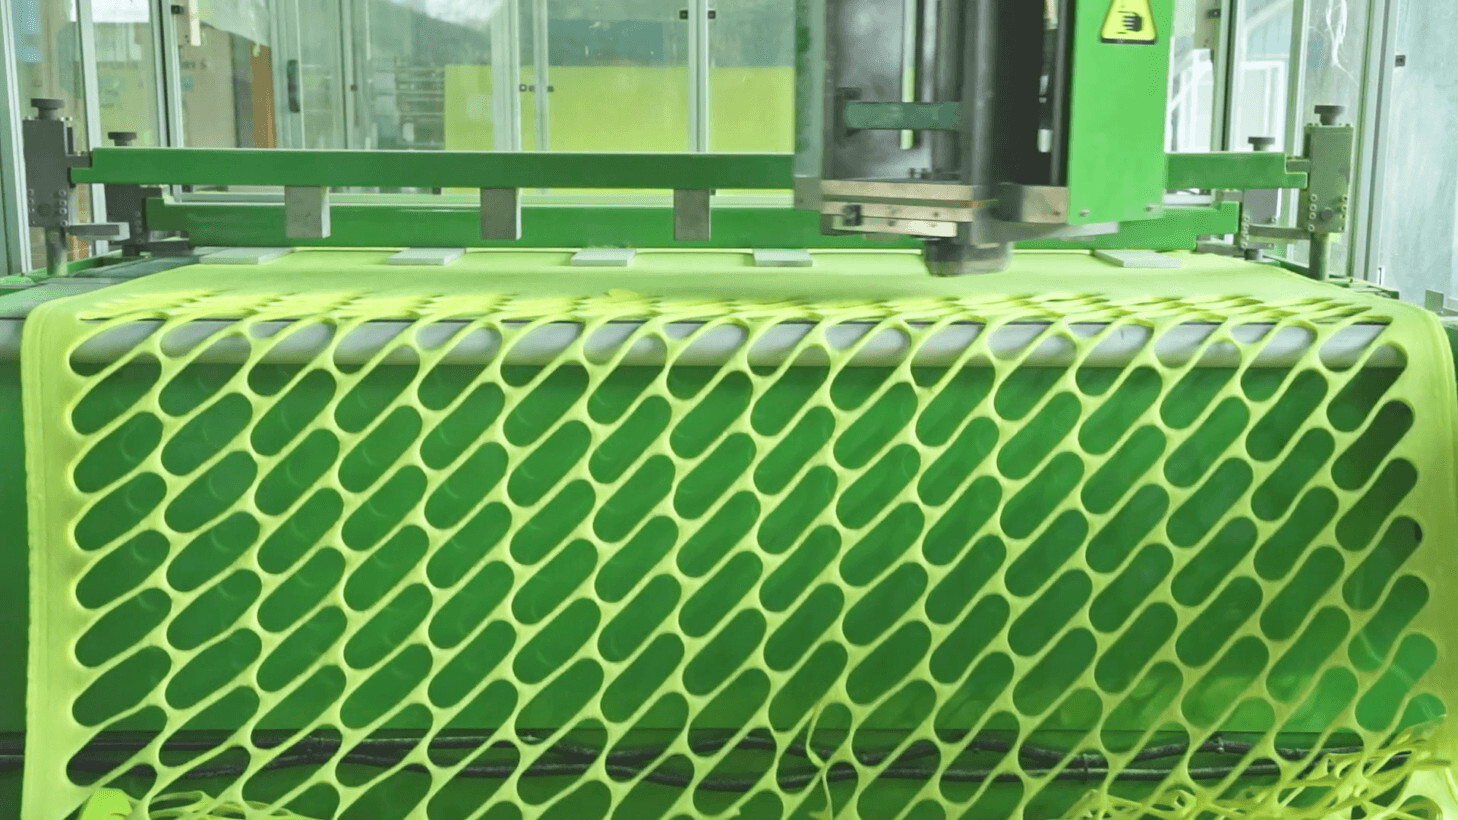 Watching tennis balls being made is my new drug, and will be yours too